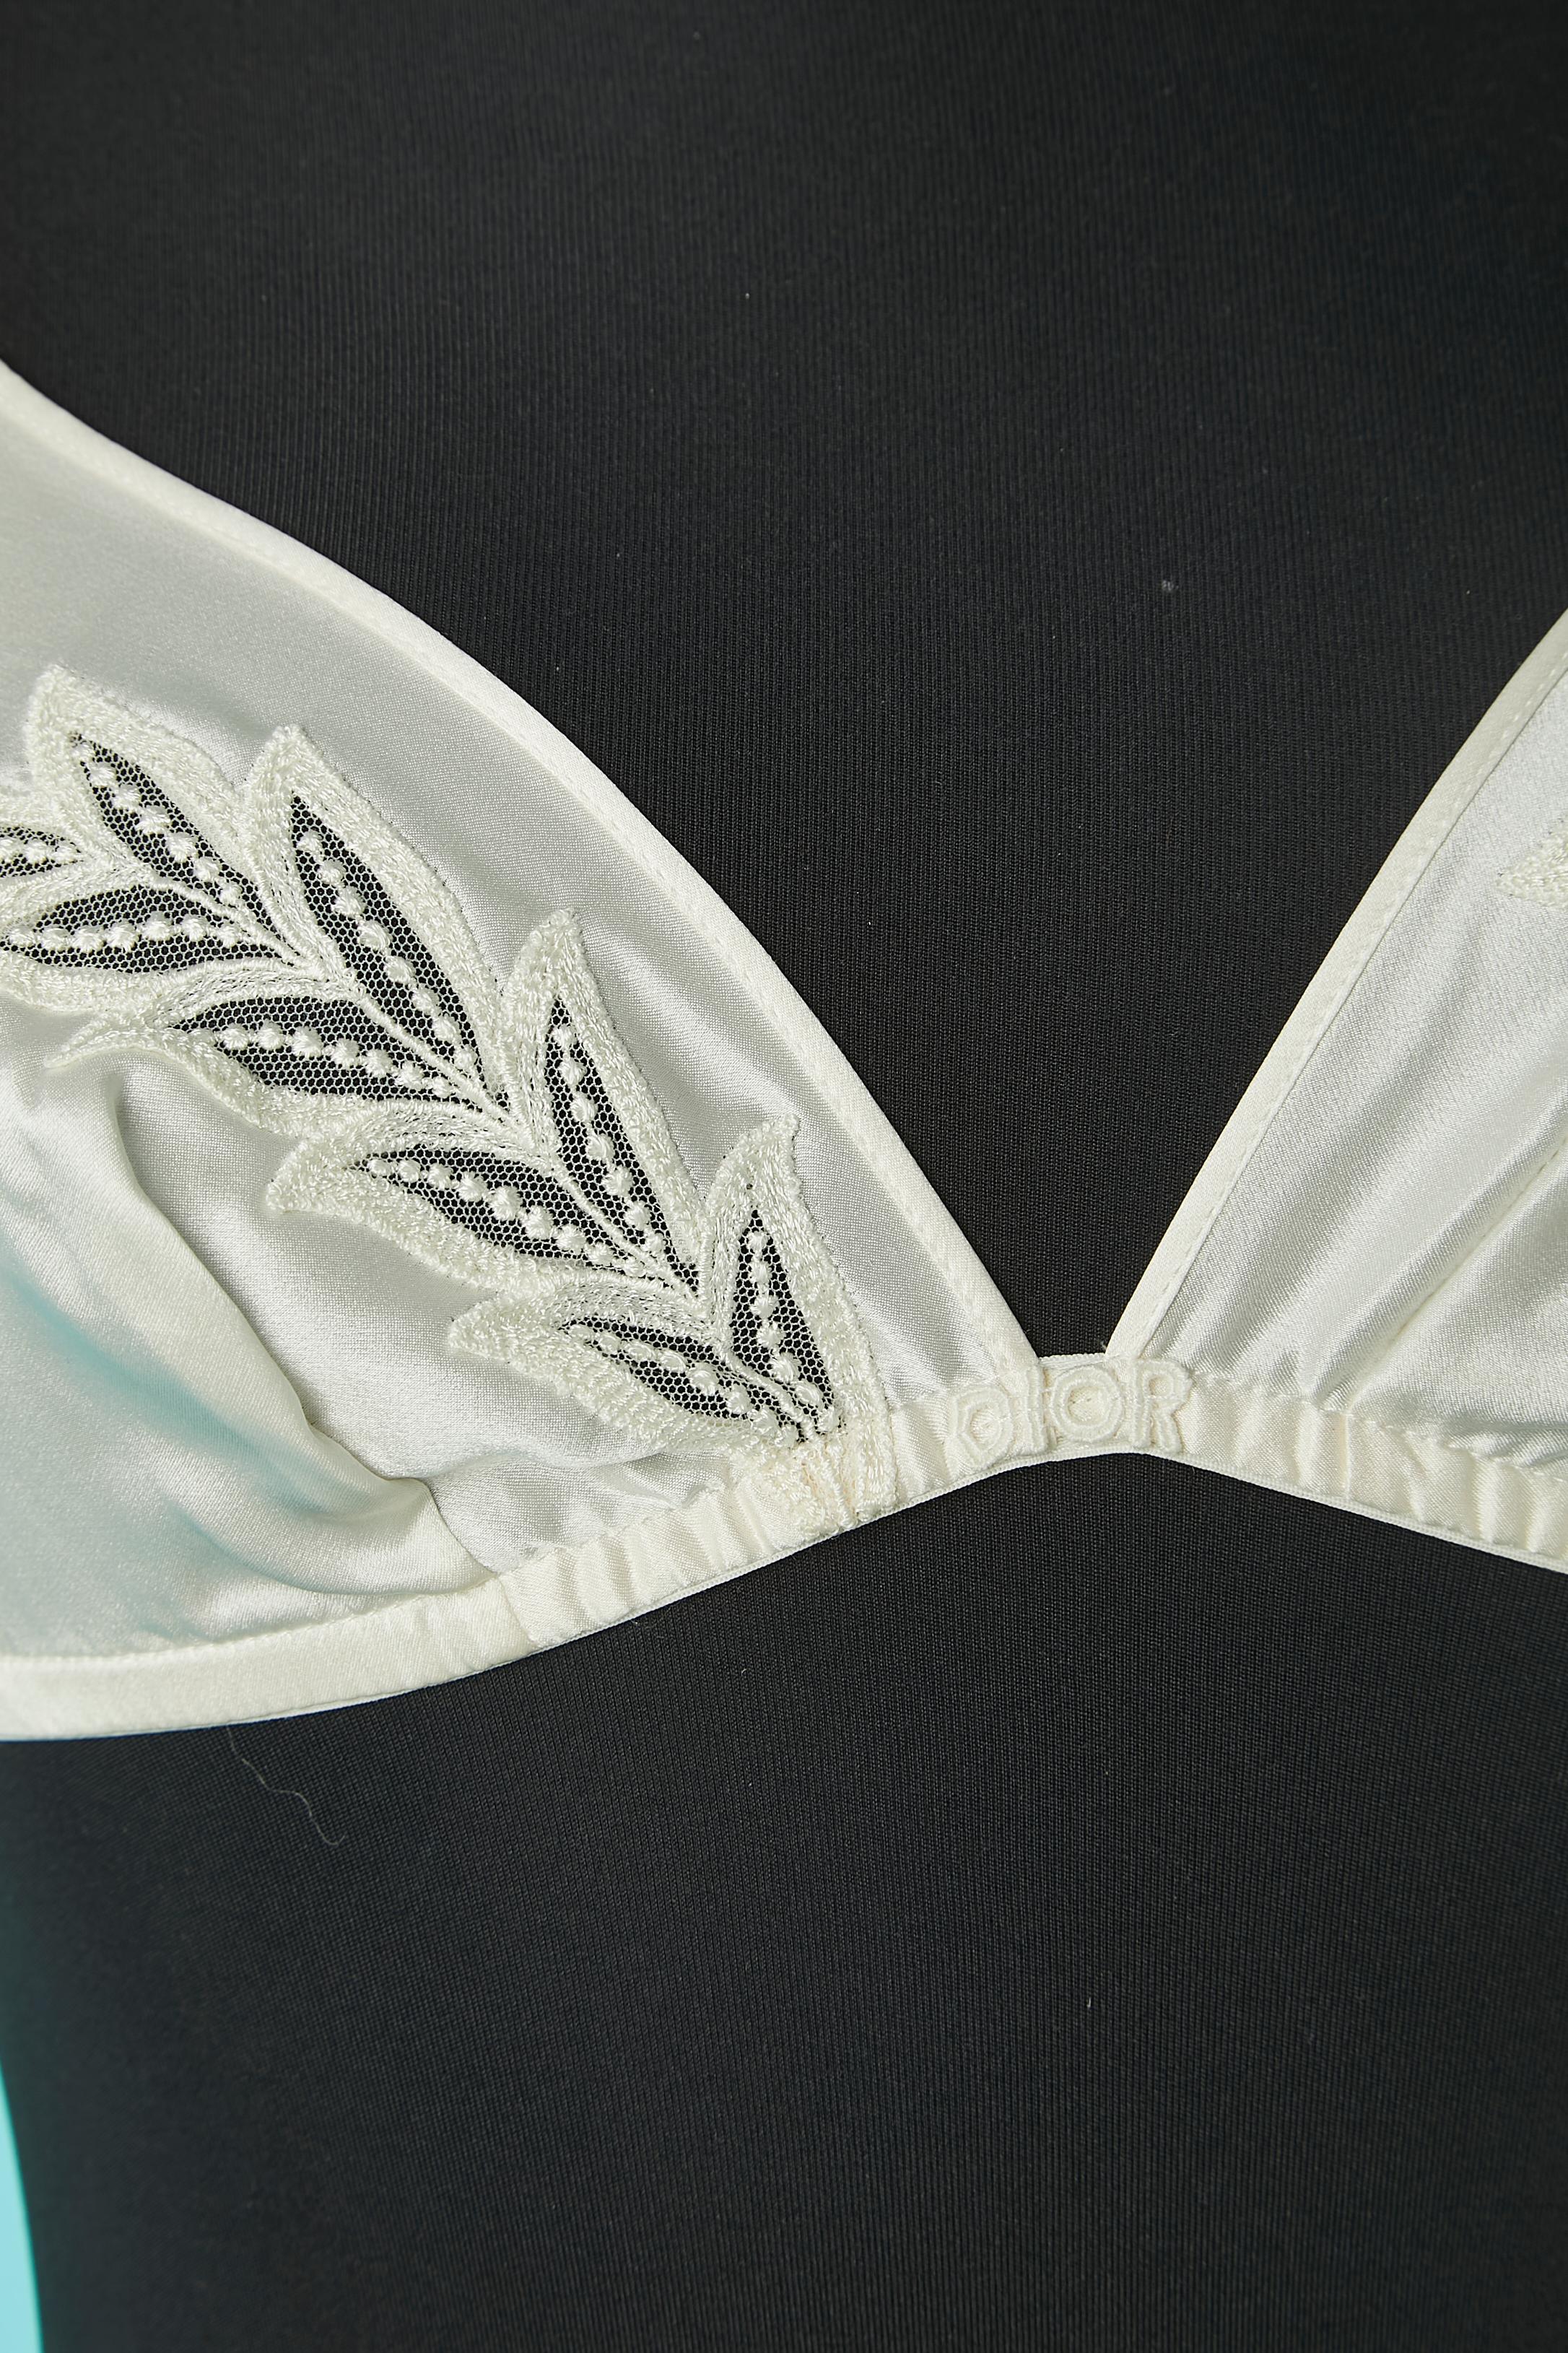 Ivory silk and lace bra and panties . Size of the bra S, Size of the pantie : M 
Adjustable shoulder strap

